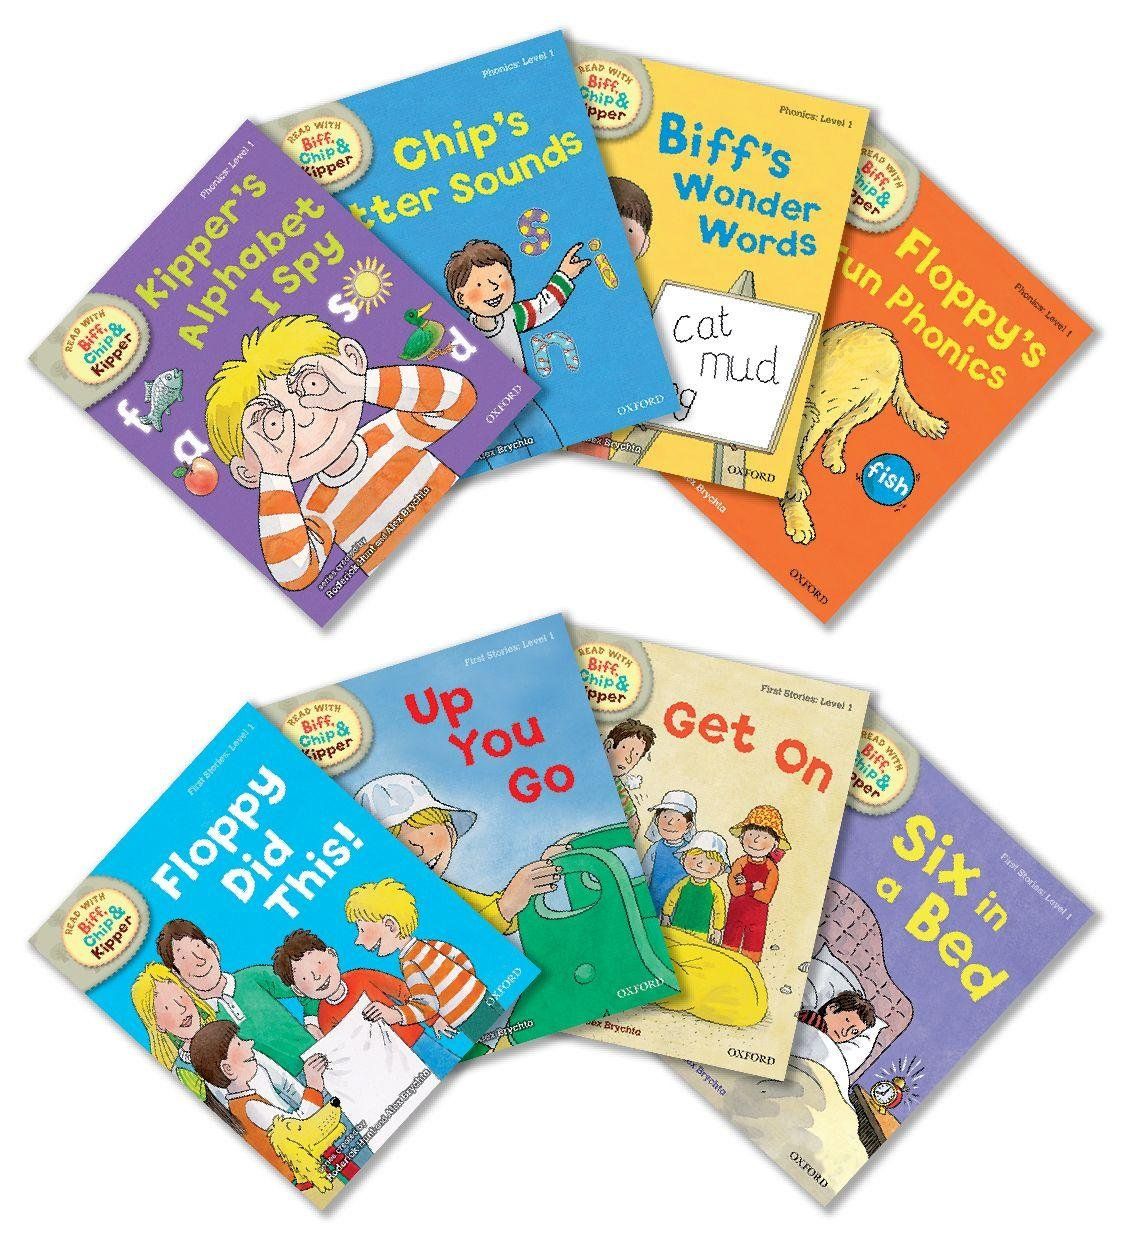 Biff, Chip and Kipper learning books are online free as e-books